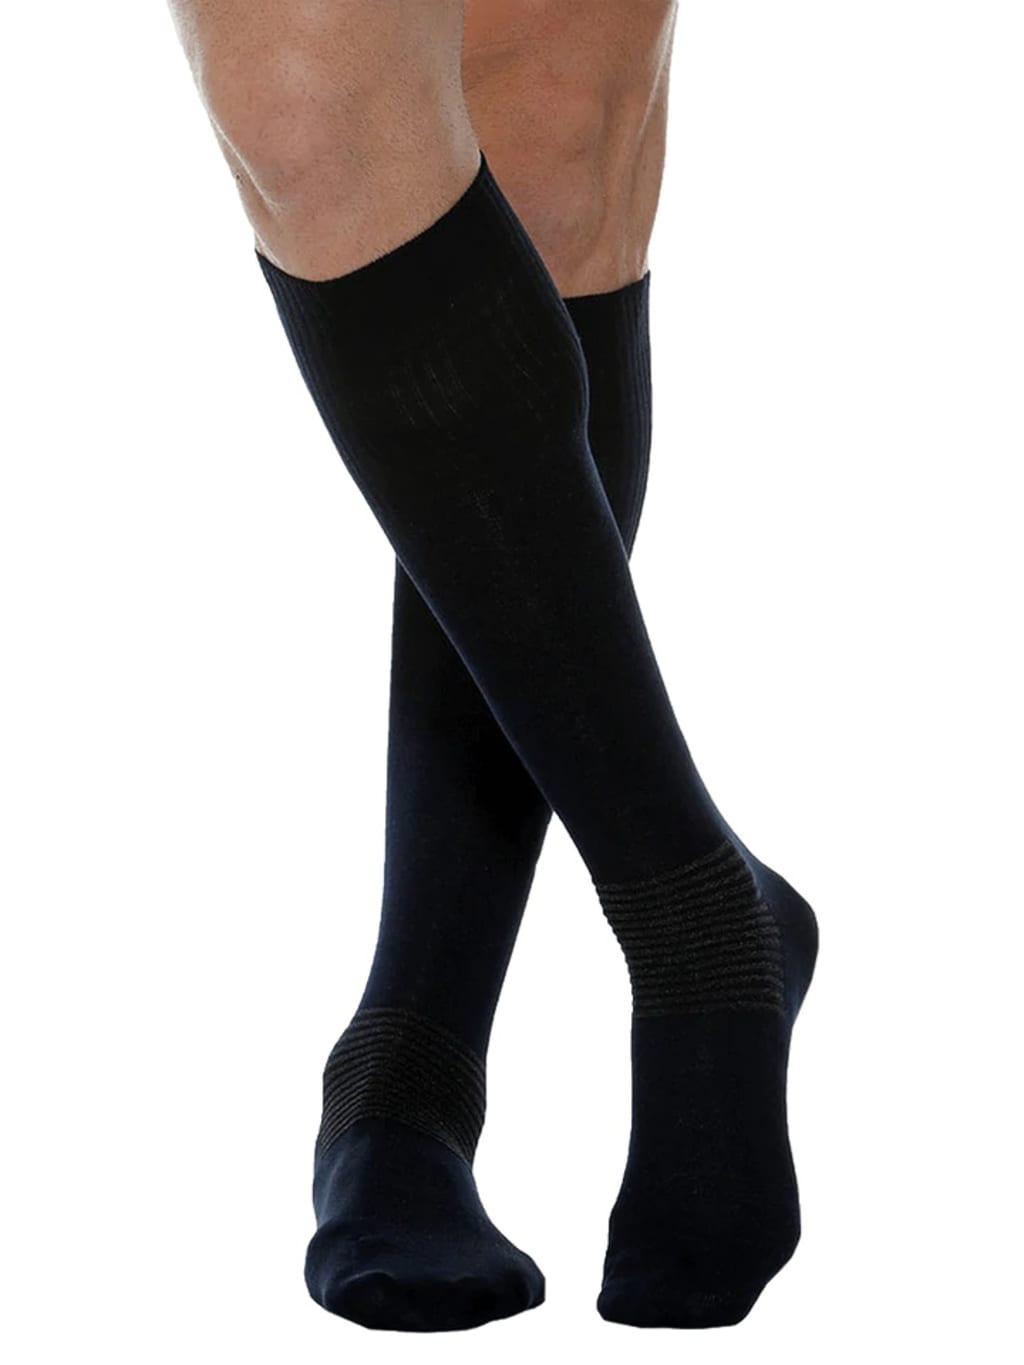 All You Need To Know About Compression Socks | Longevity